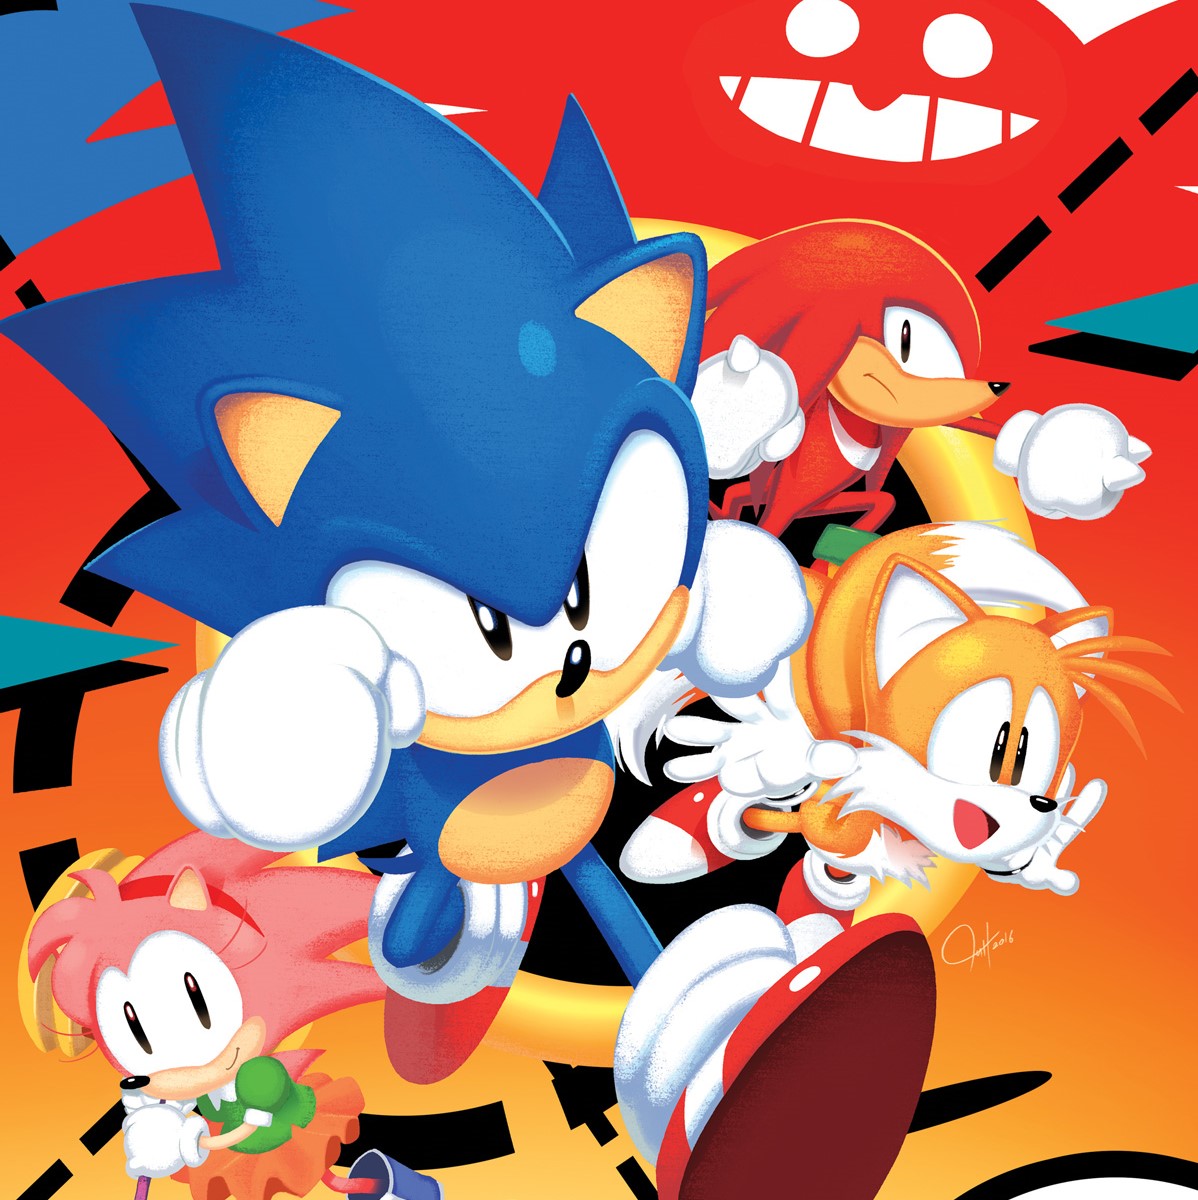 IDW Publishing to release a Classic Sonic miniseries in 2021 - Tails'  Channel